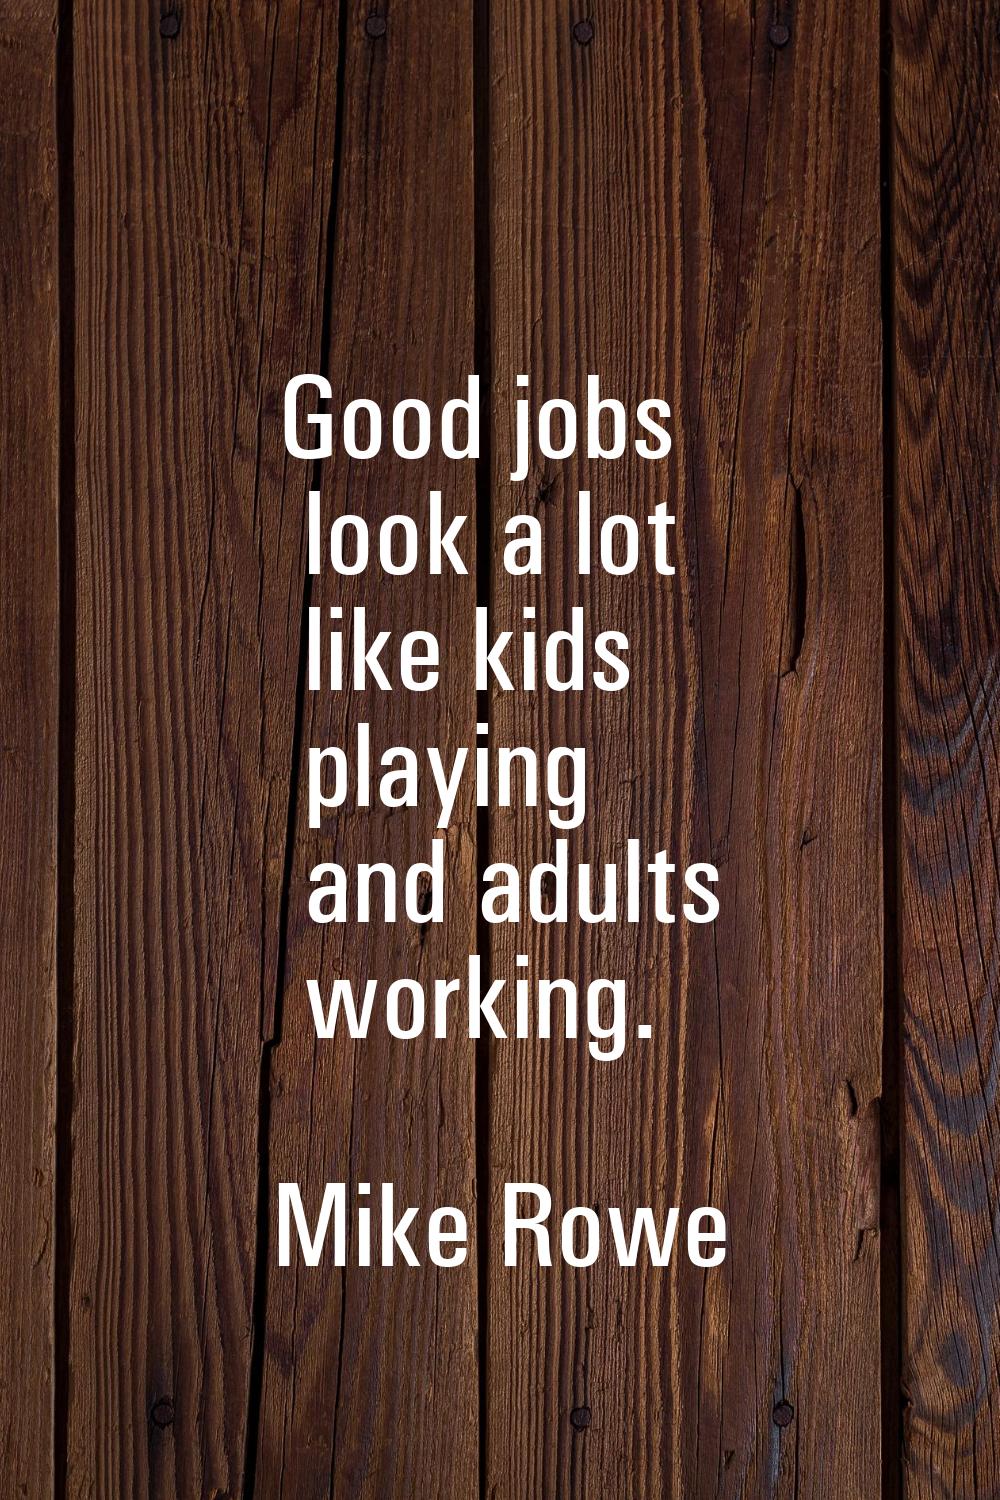 Good jobs look a lot like kids playing and adults working.